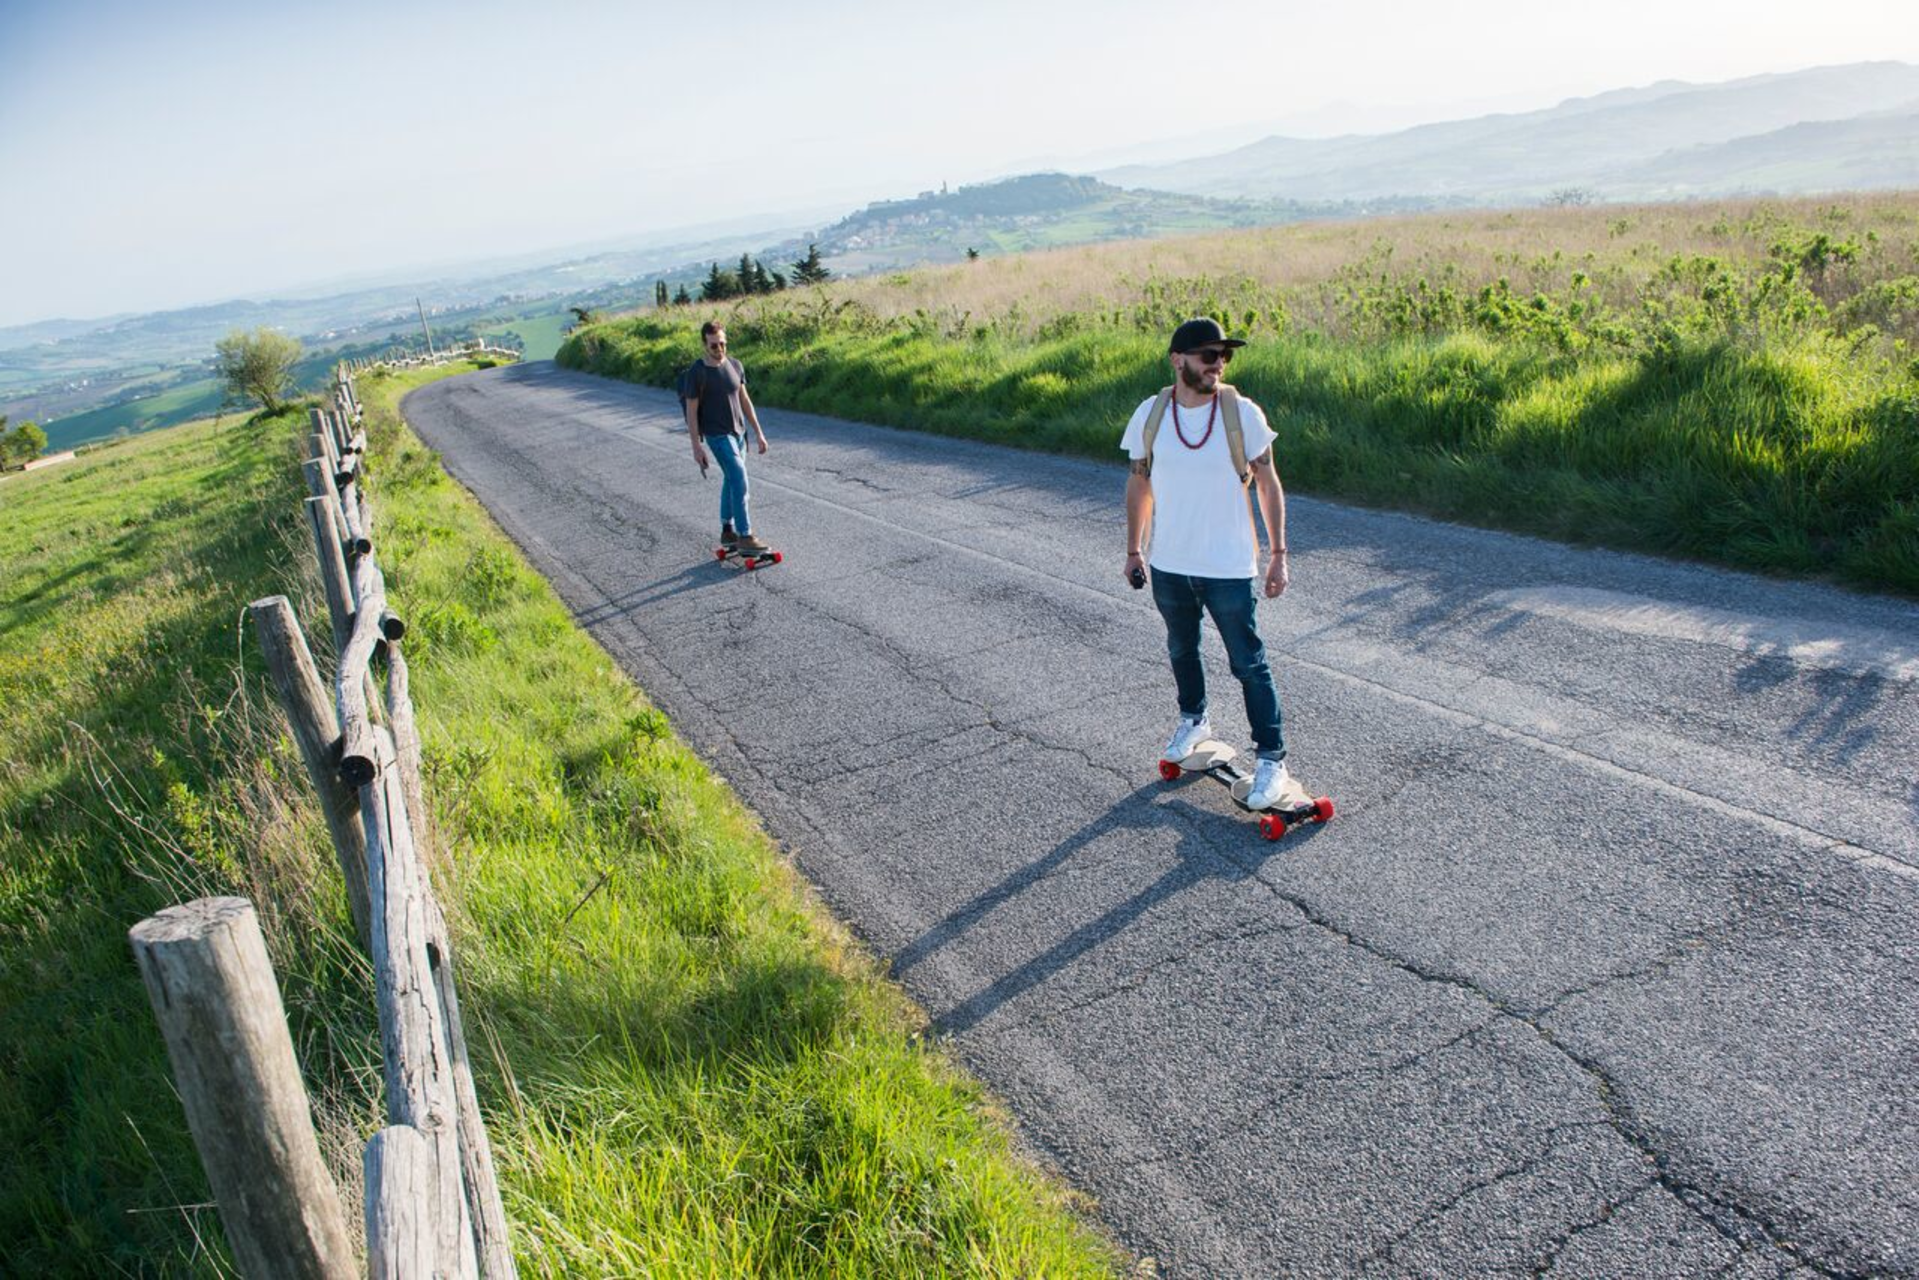 Linky: a foldable electric longboard that fits in a bag